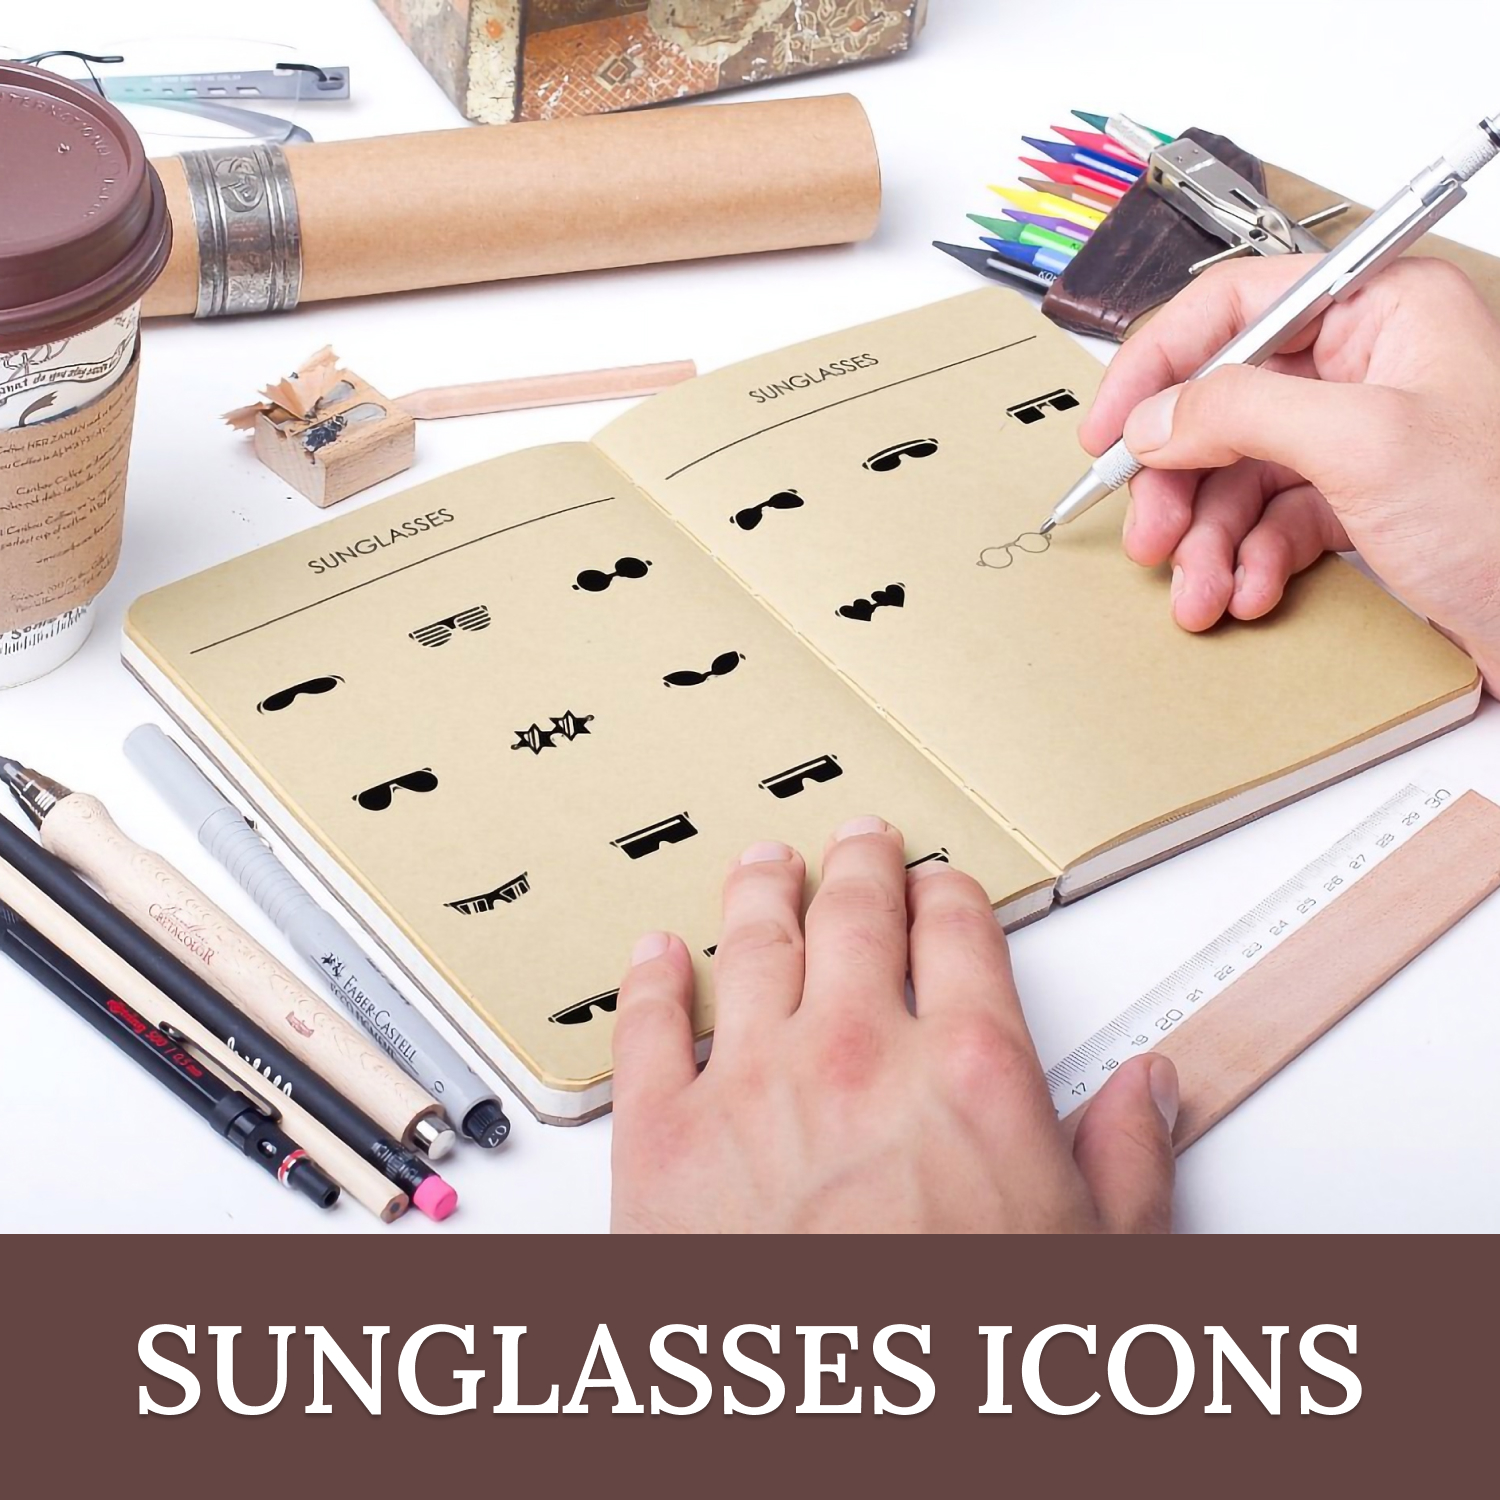 Images preview sunglasses icons.